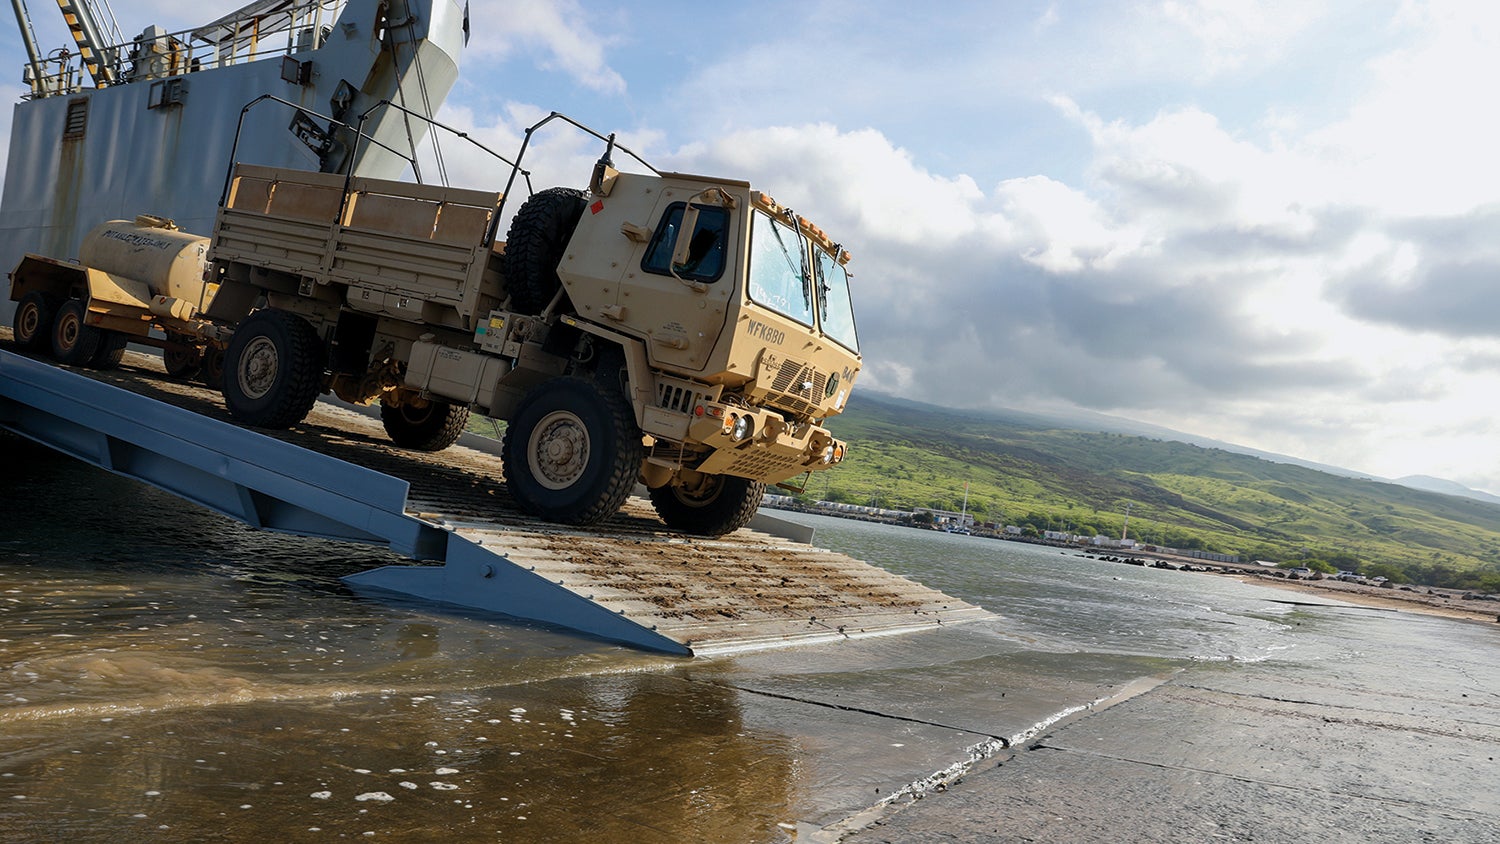 Troops with the 25th Infantry Division unload vehicles from an Army Logistics Support Vessel for a Joint Pacific Multinational Readiness Center exercise in Hawaii. (Credit: U.S. Army/Pfc. Owen Stupcenski)